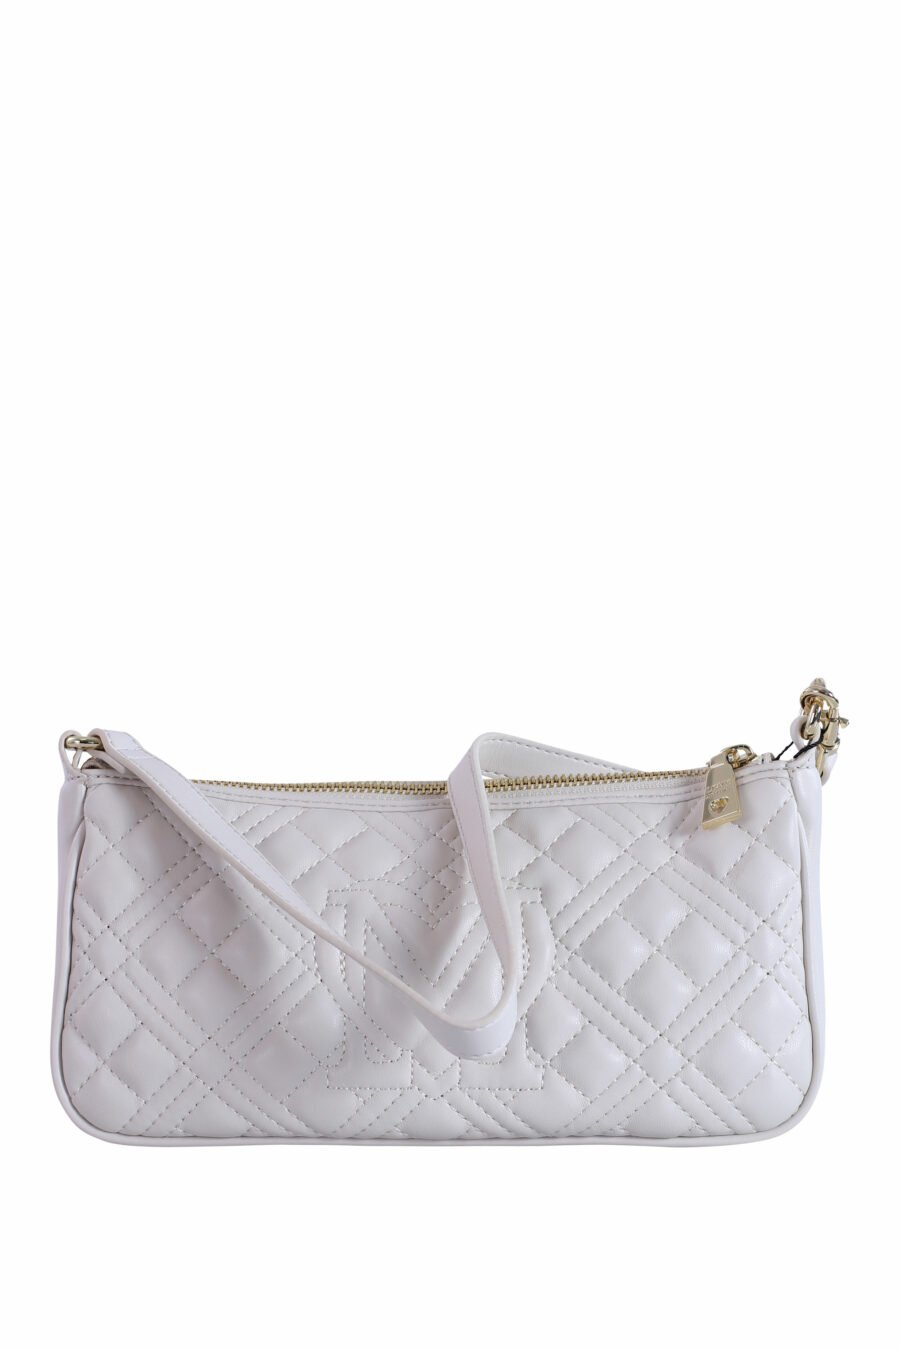 White quilted shoulder bag with gold logo - IMG 2893